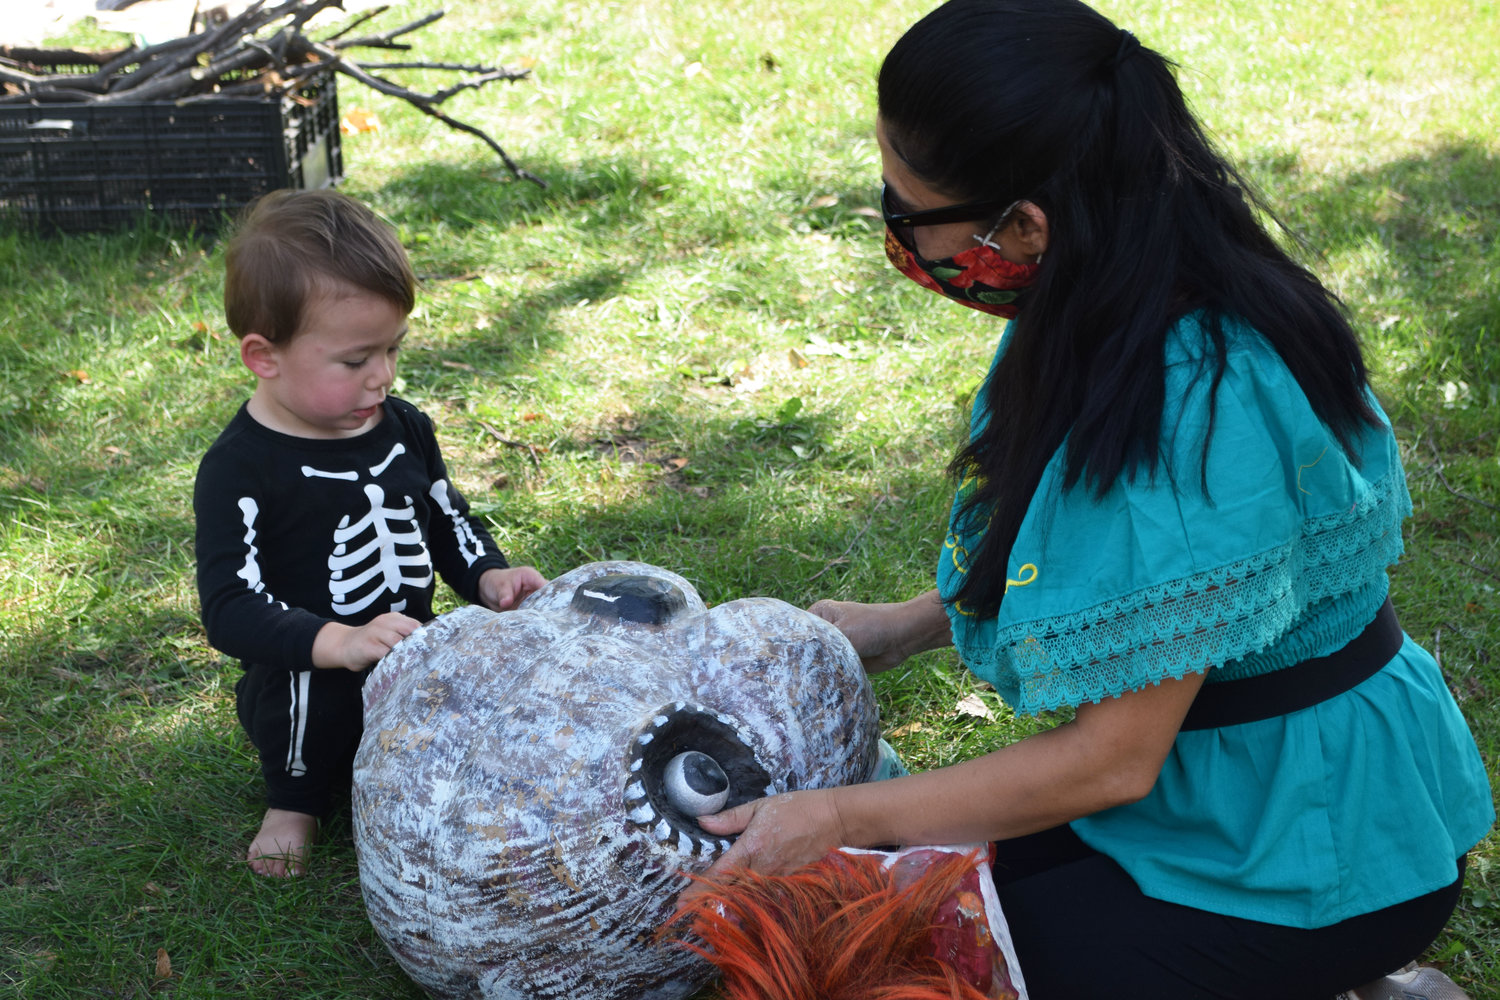 BareBones Extravaganza 2021 Co-Director Adriana Cerrillo shares details of a walrus mask with the day’s youngest participant. (Photo by Jill Boogren)